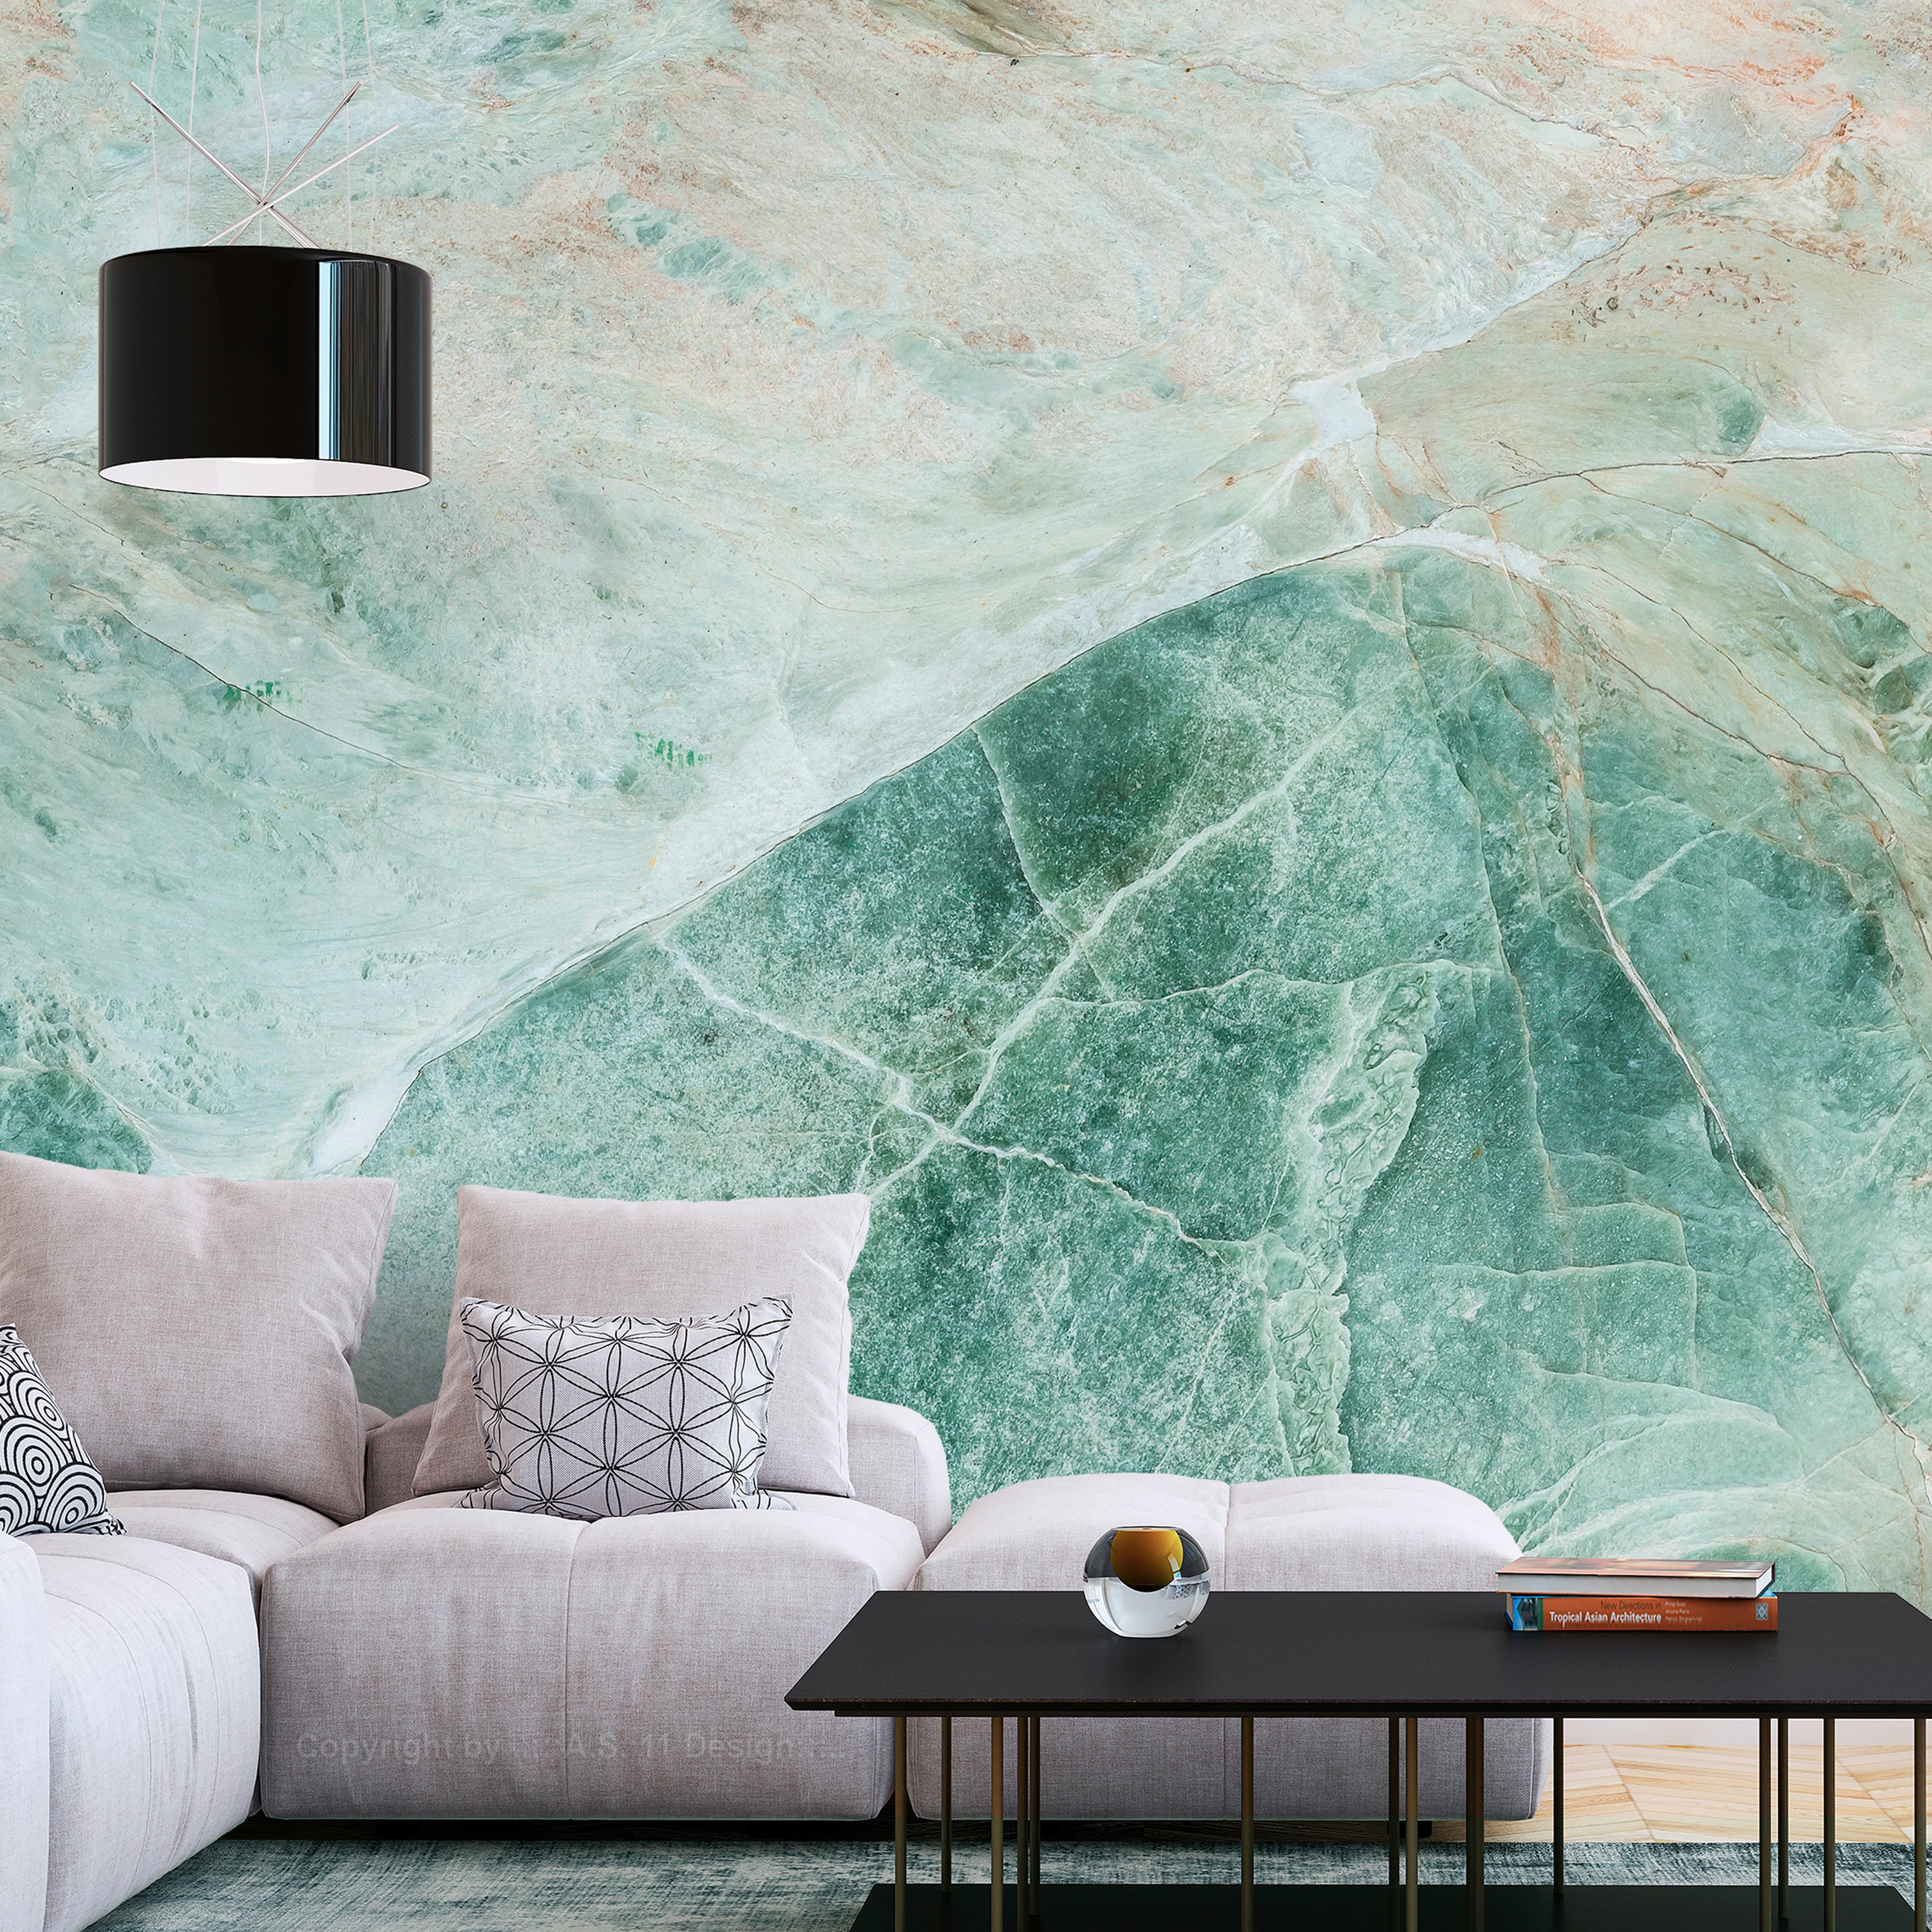 Self-adhesive Wallpaper - Turquoise Marble - 98x70